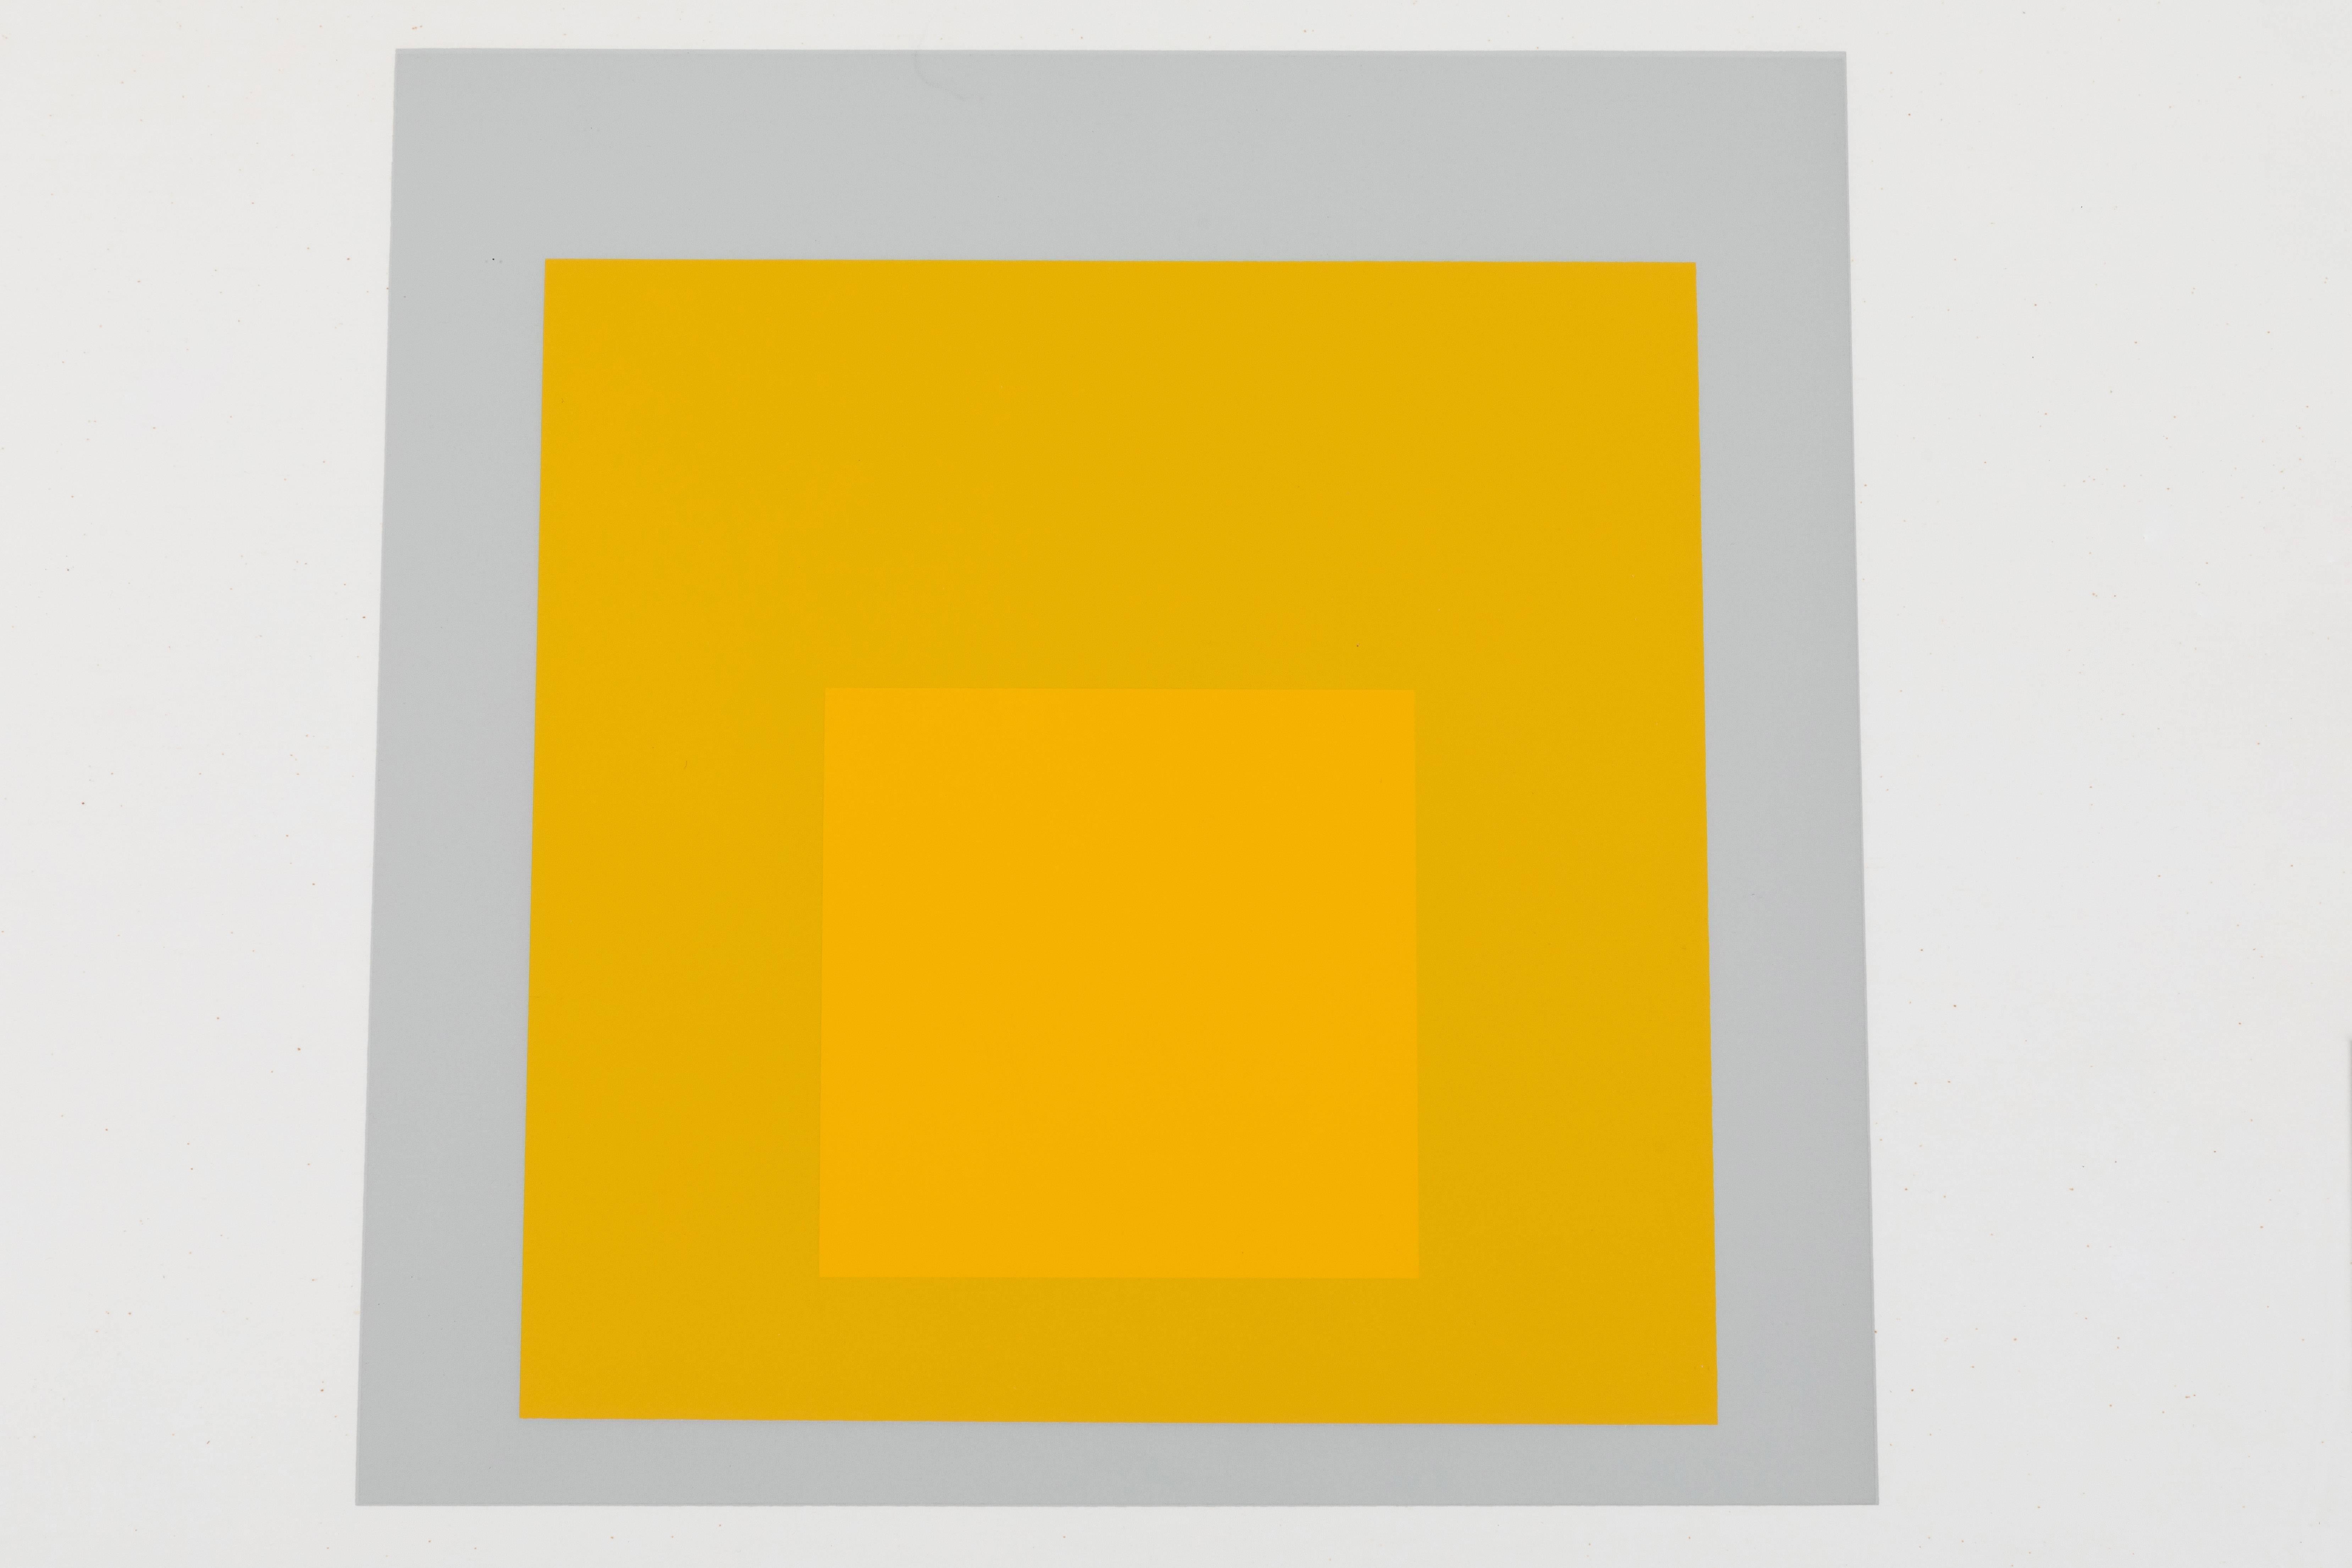 American 1 of 4 Folio Prints from Formulation Articulation by Josef Albers